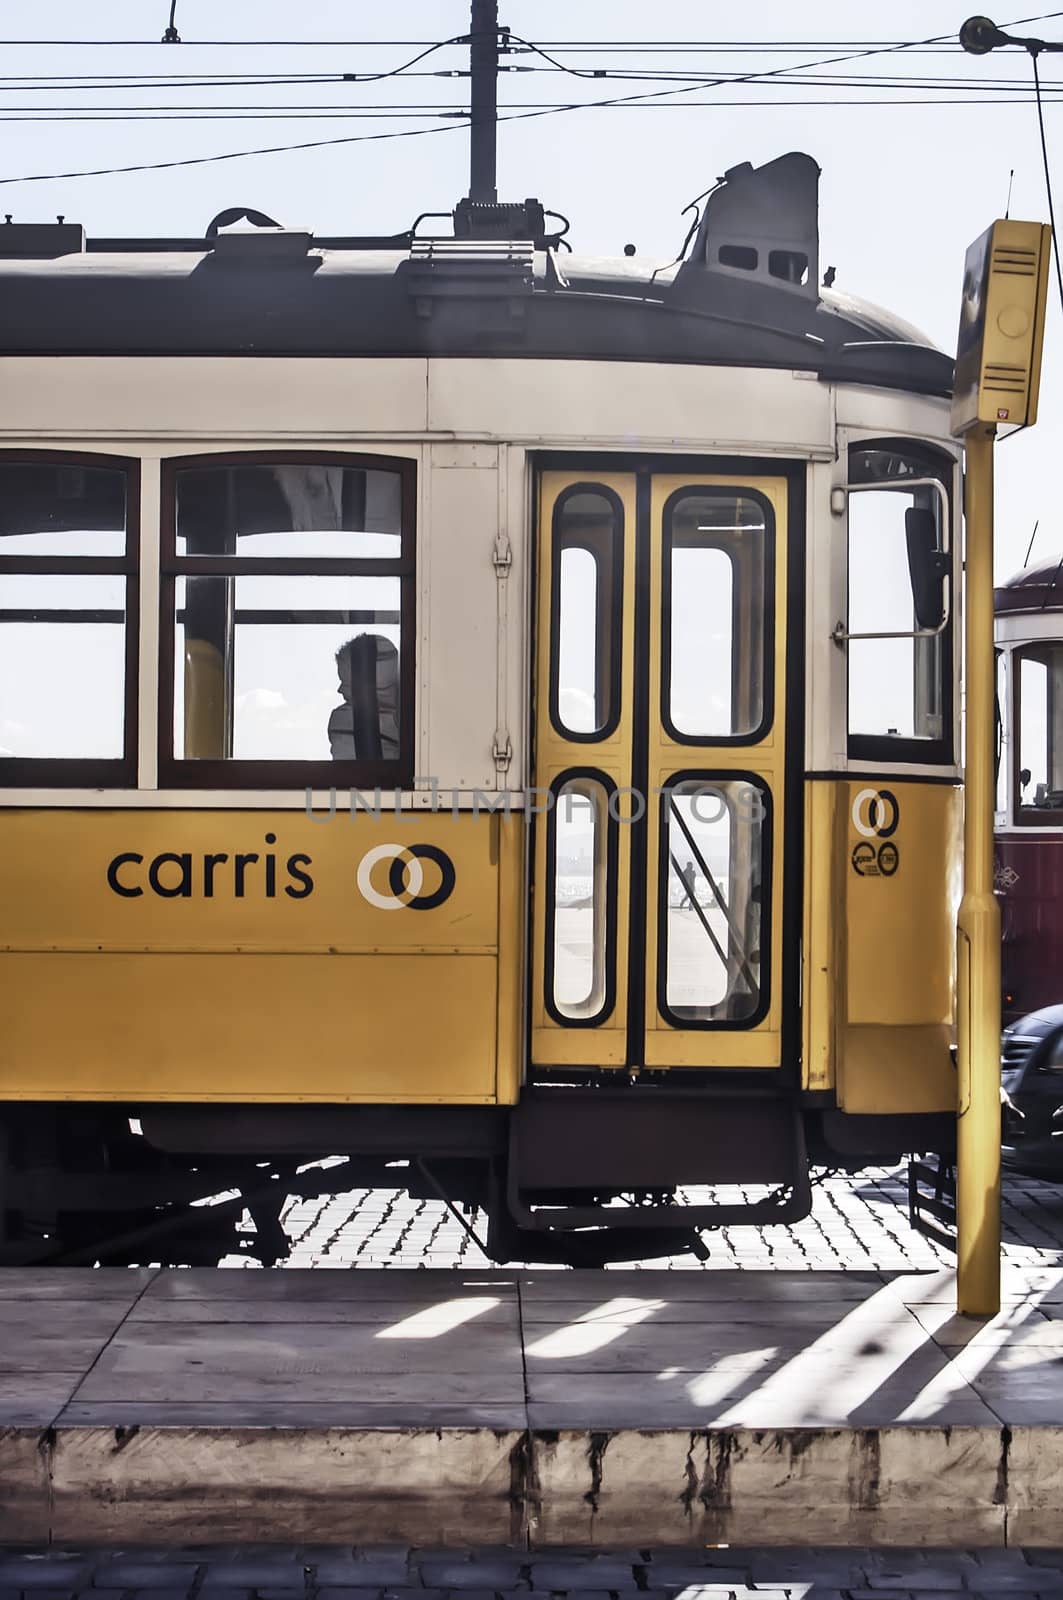 Tram of the public company Carris in Lisbon